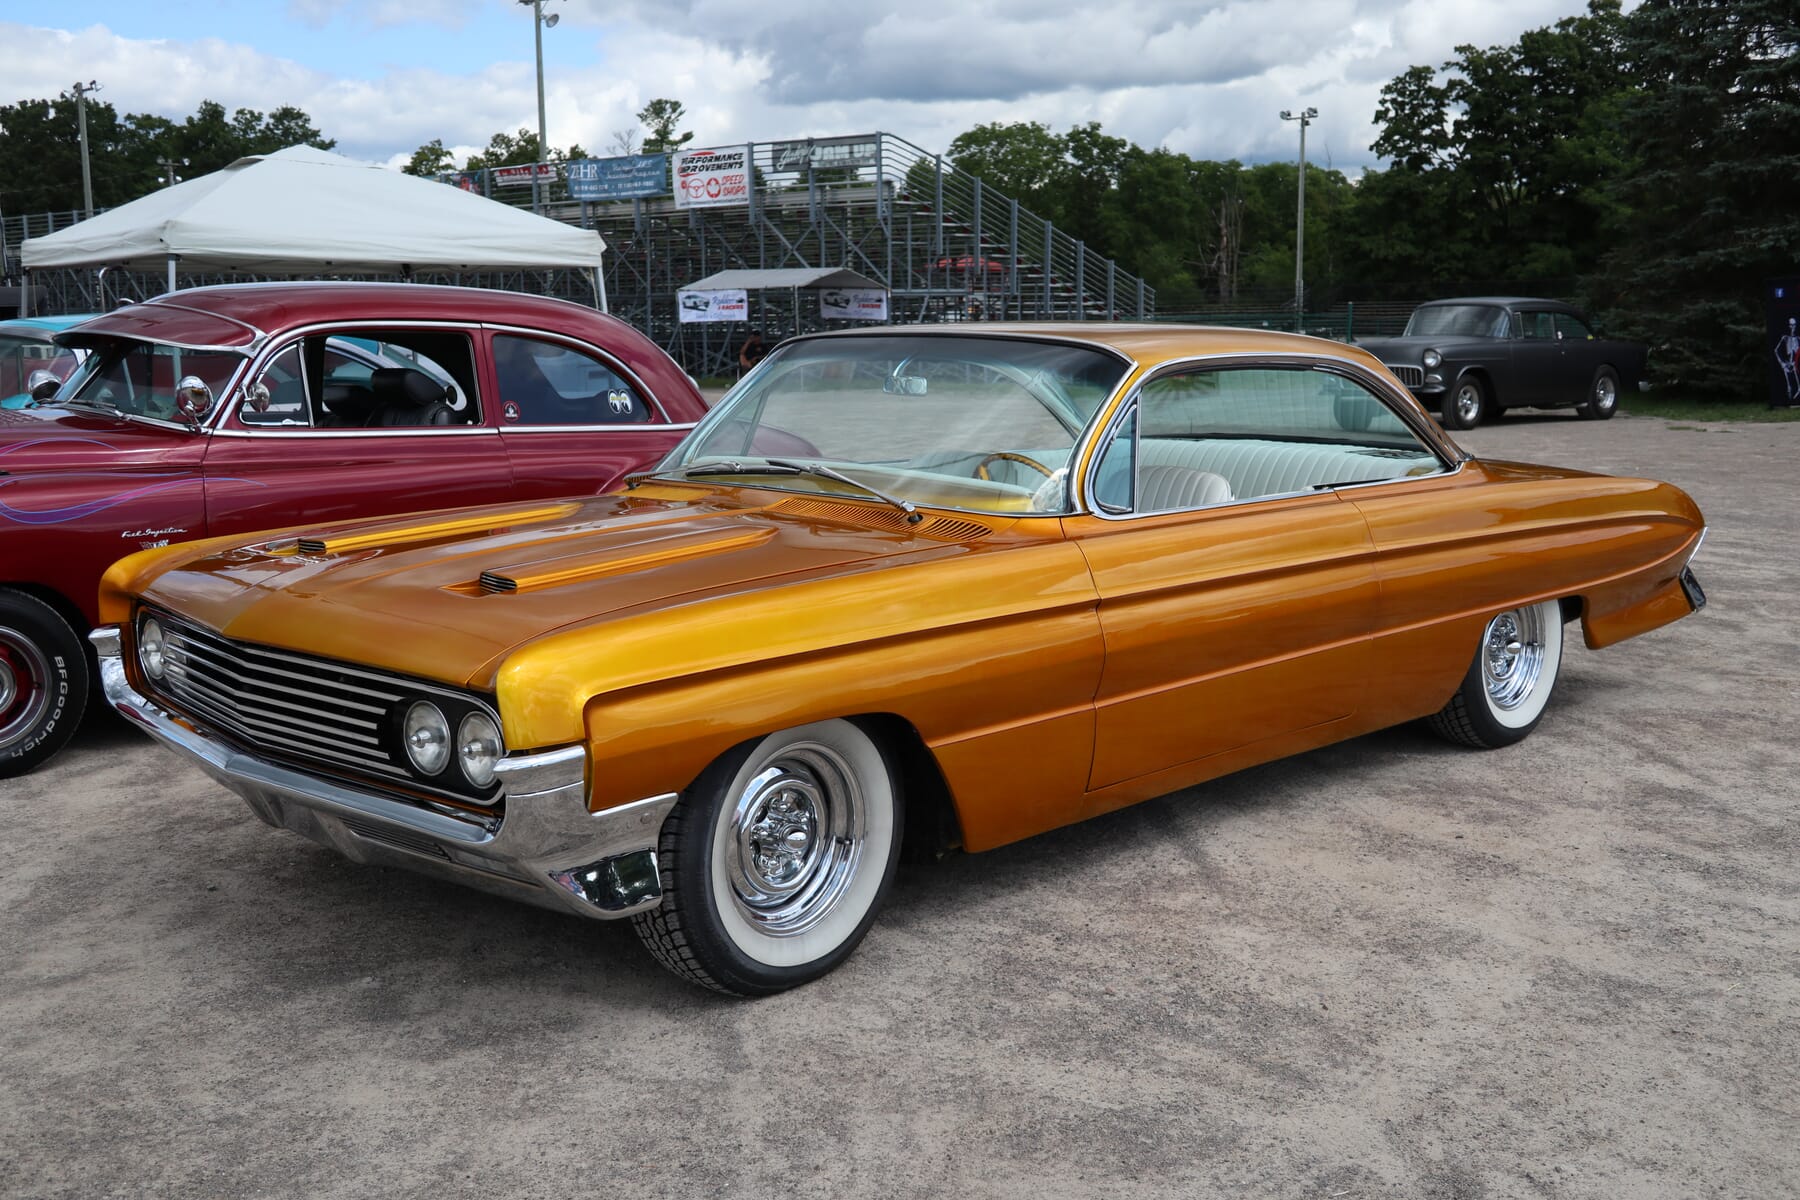 1961 Oldsmobile Super 88 with a unique sunset color and whitewall tires